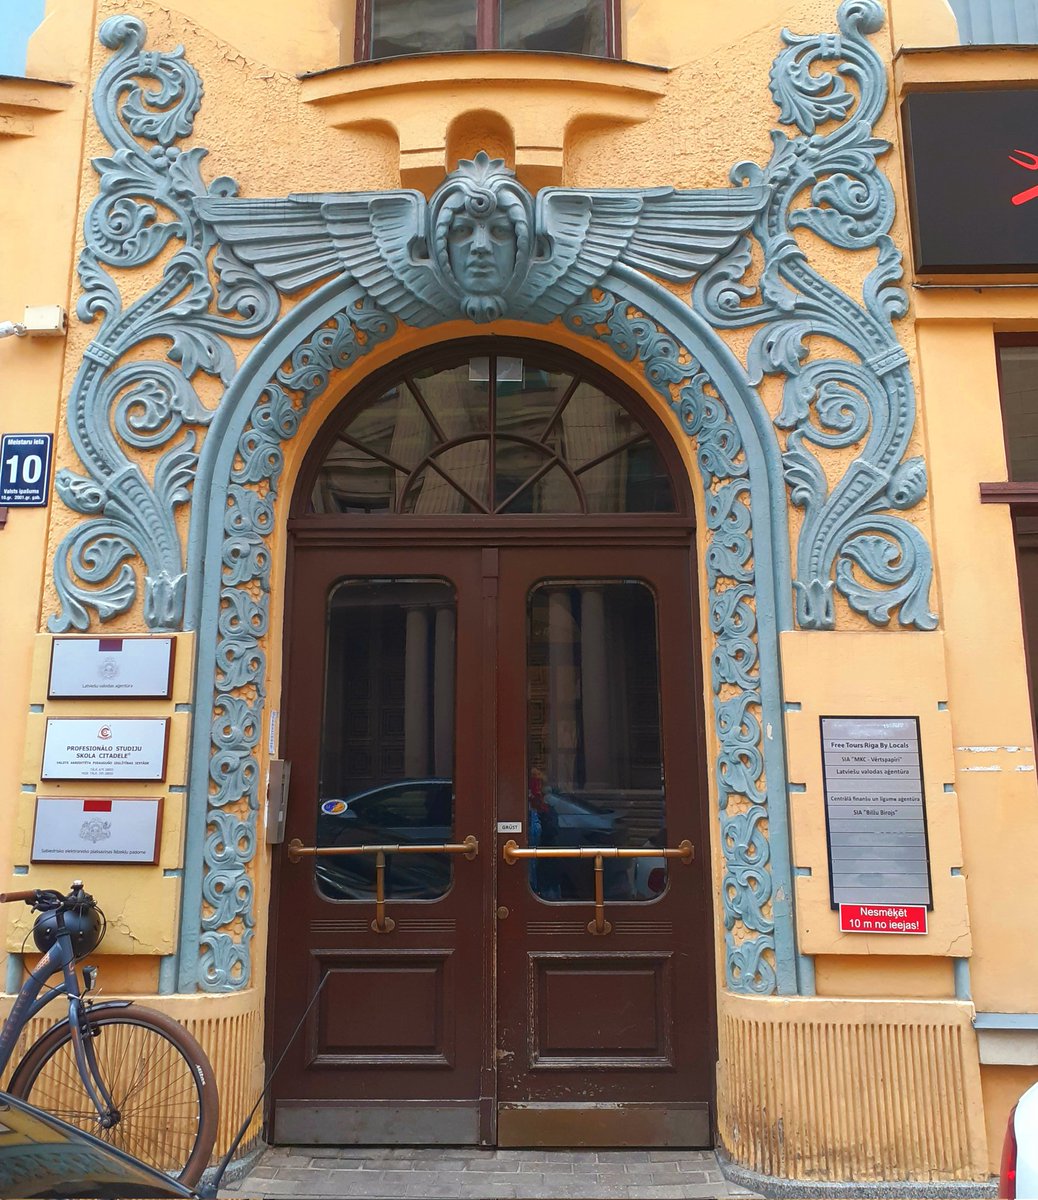 Now, that's one heck of a way to make an entrance! Nothing is ordinary in Riga, Latvia. Definitely worth a visit! #travel #writing #books #art nouveau #architecture #Riga #Latvia #Getaway